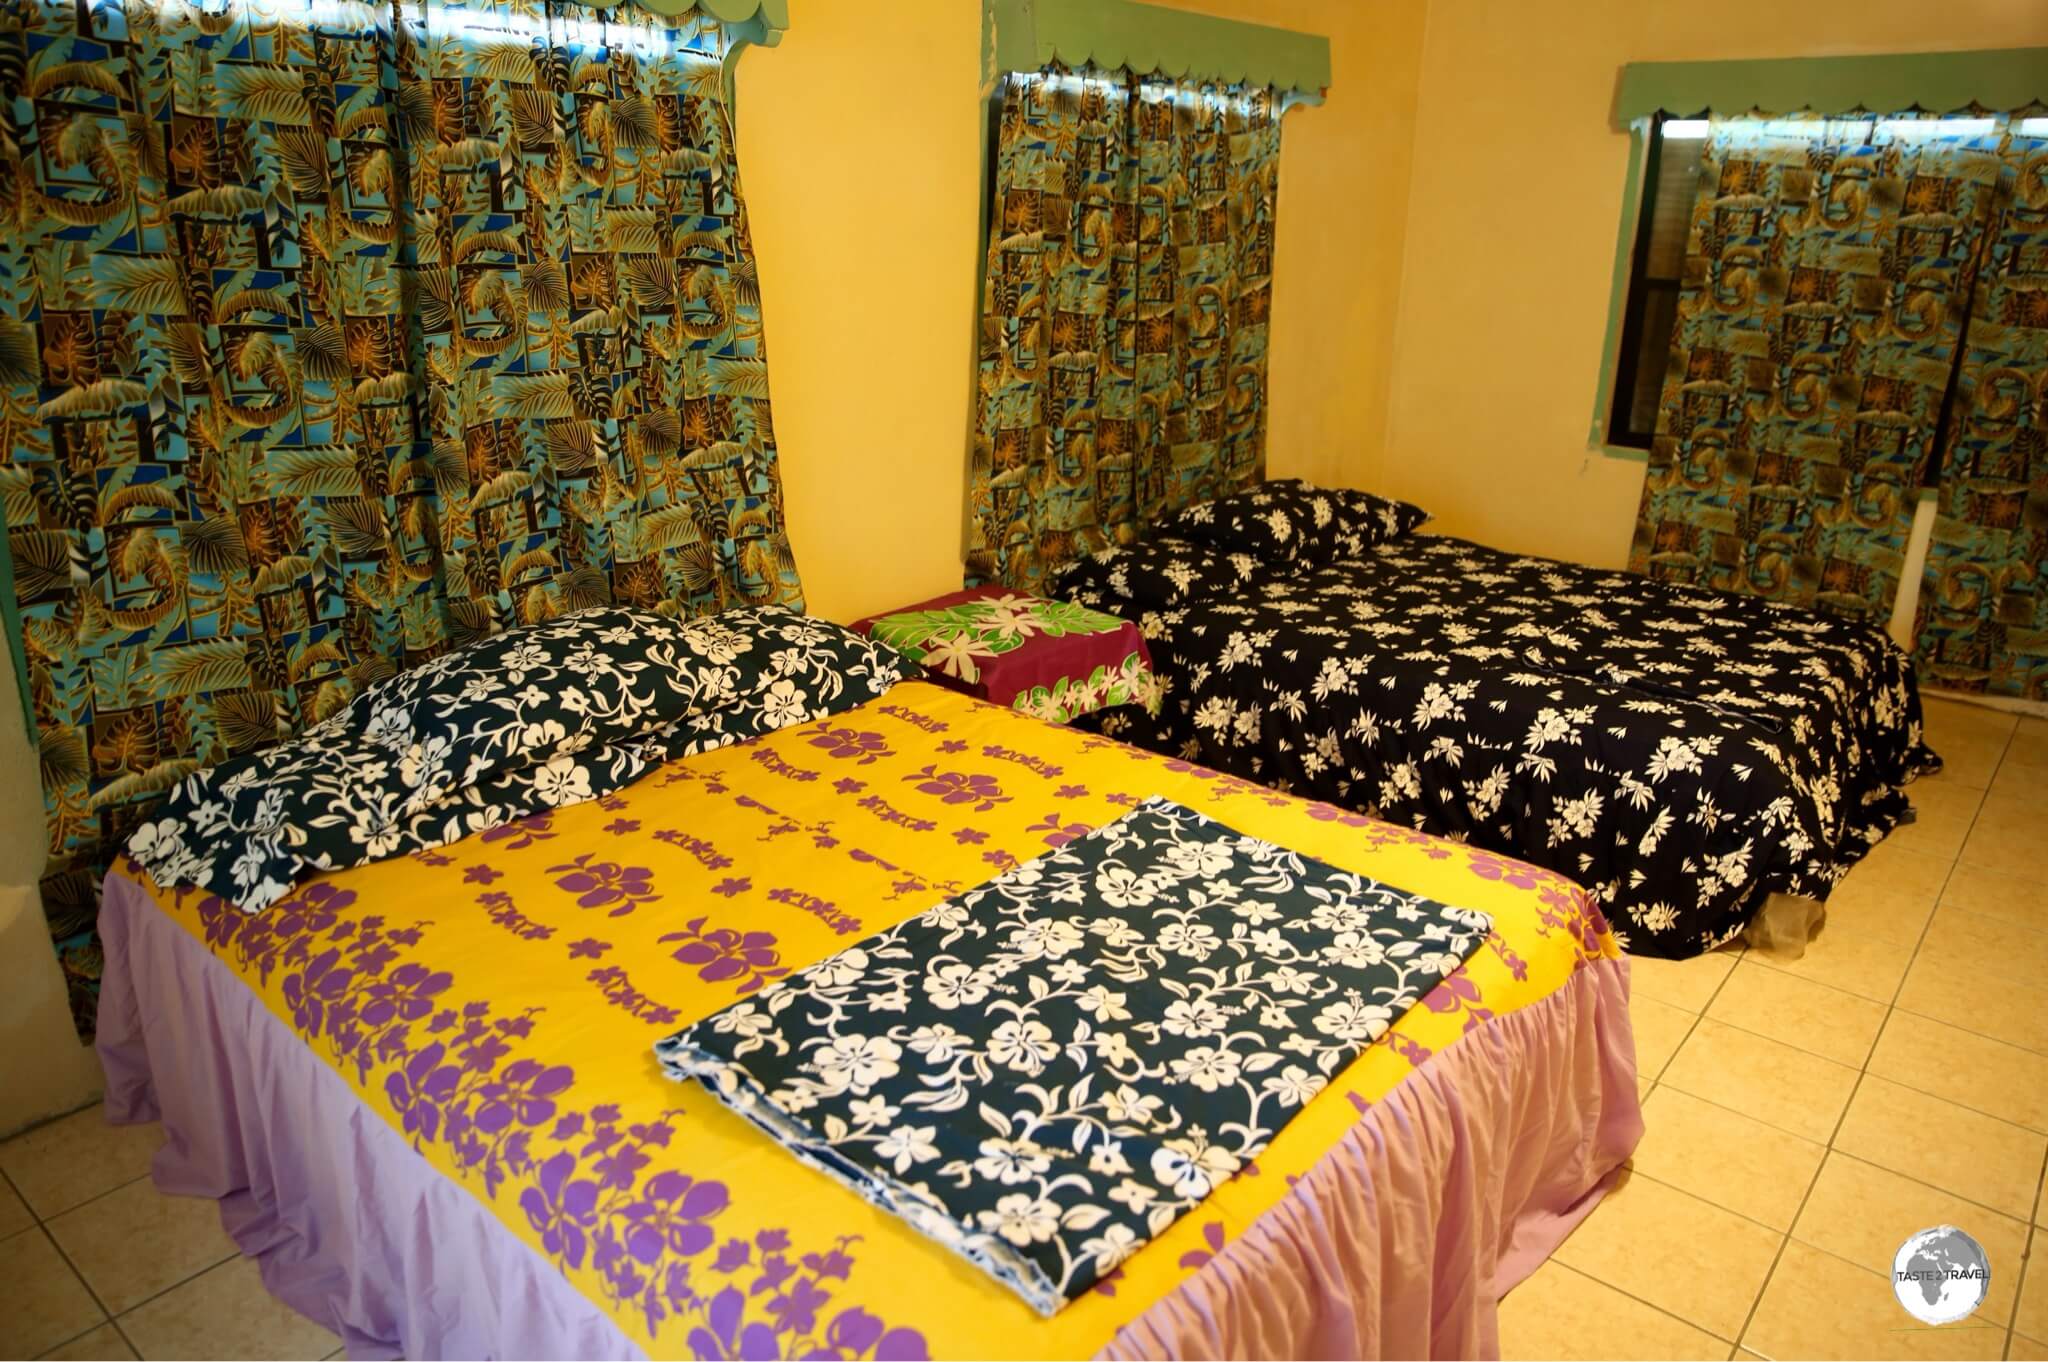 My colourful room at the homestay.